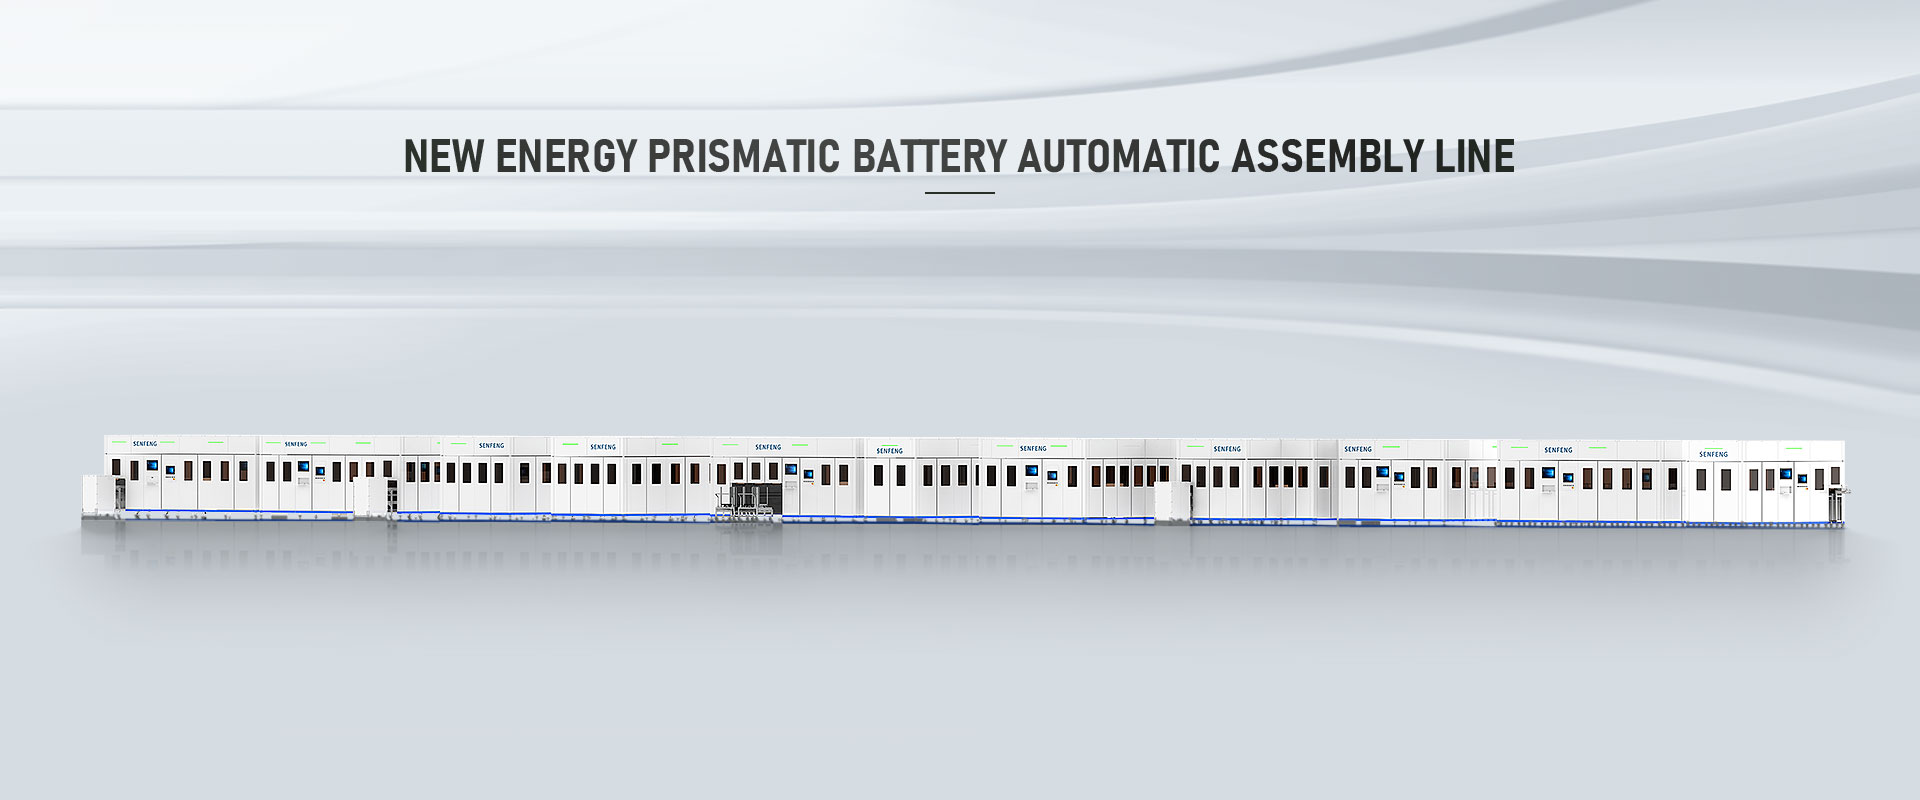 New Energy Prismatic Battery Automatic Assembly Line